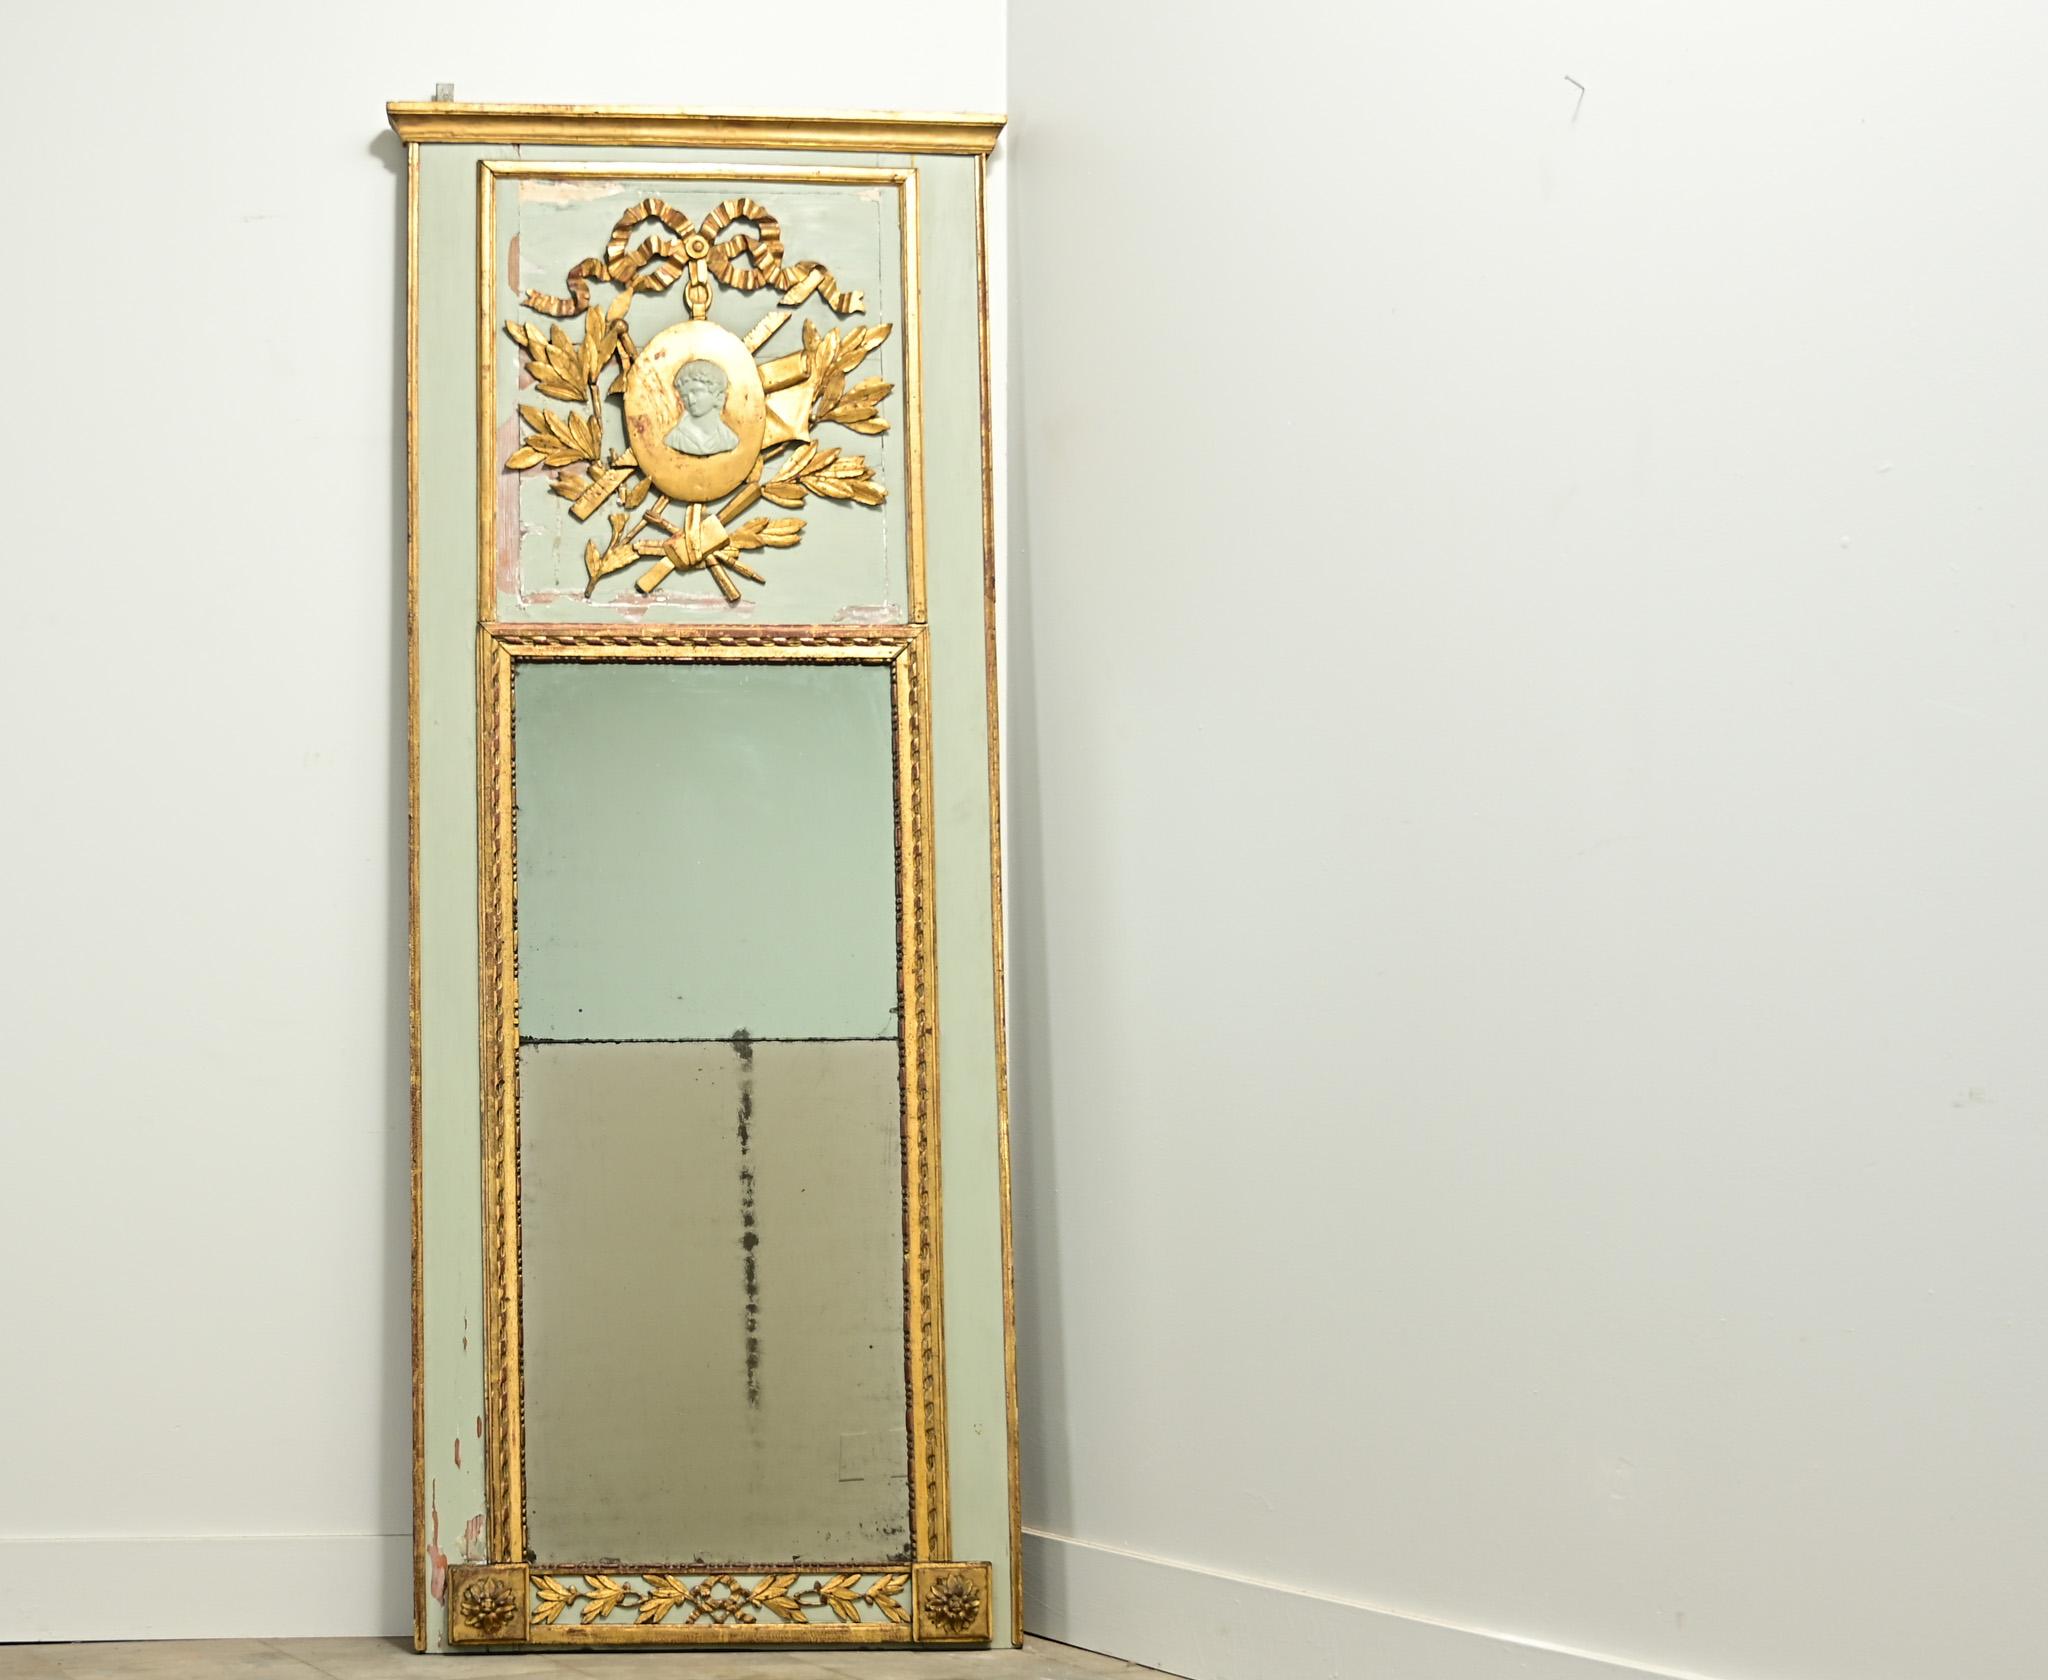 An interesting Empire style French trumeau taken from a larger boiserie paneling. The applied carved and gilt crest depicts a center cameo with bows, laurel leaves and architectural tools. The mirror plates are both old, however, not original to the